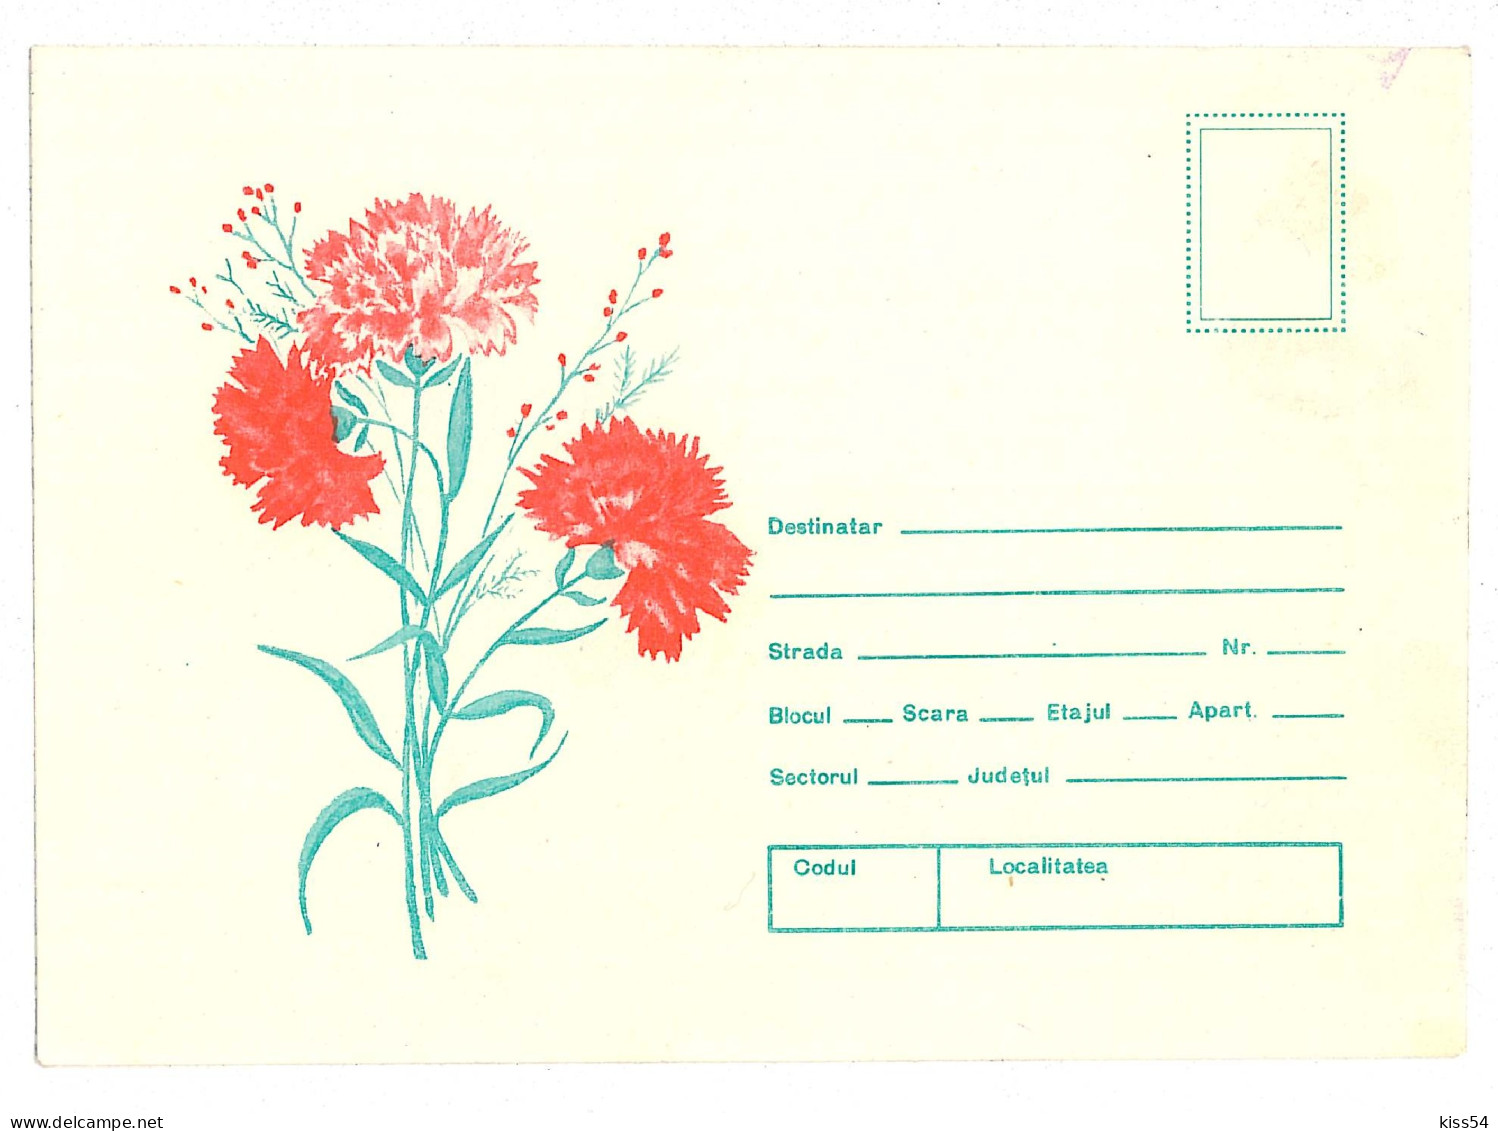 IP 92 - 82a FLOWERS, Carnations, Romania - Stationery - Unused - 1992 - Entiers Postaux